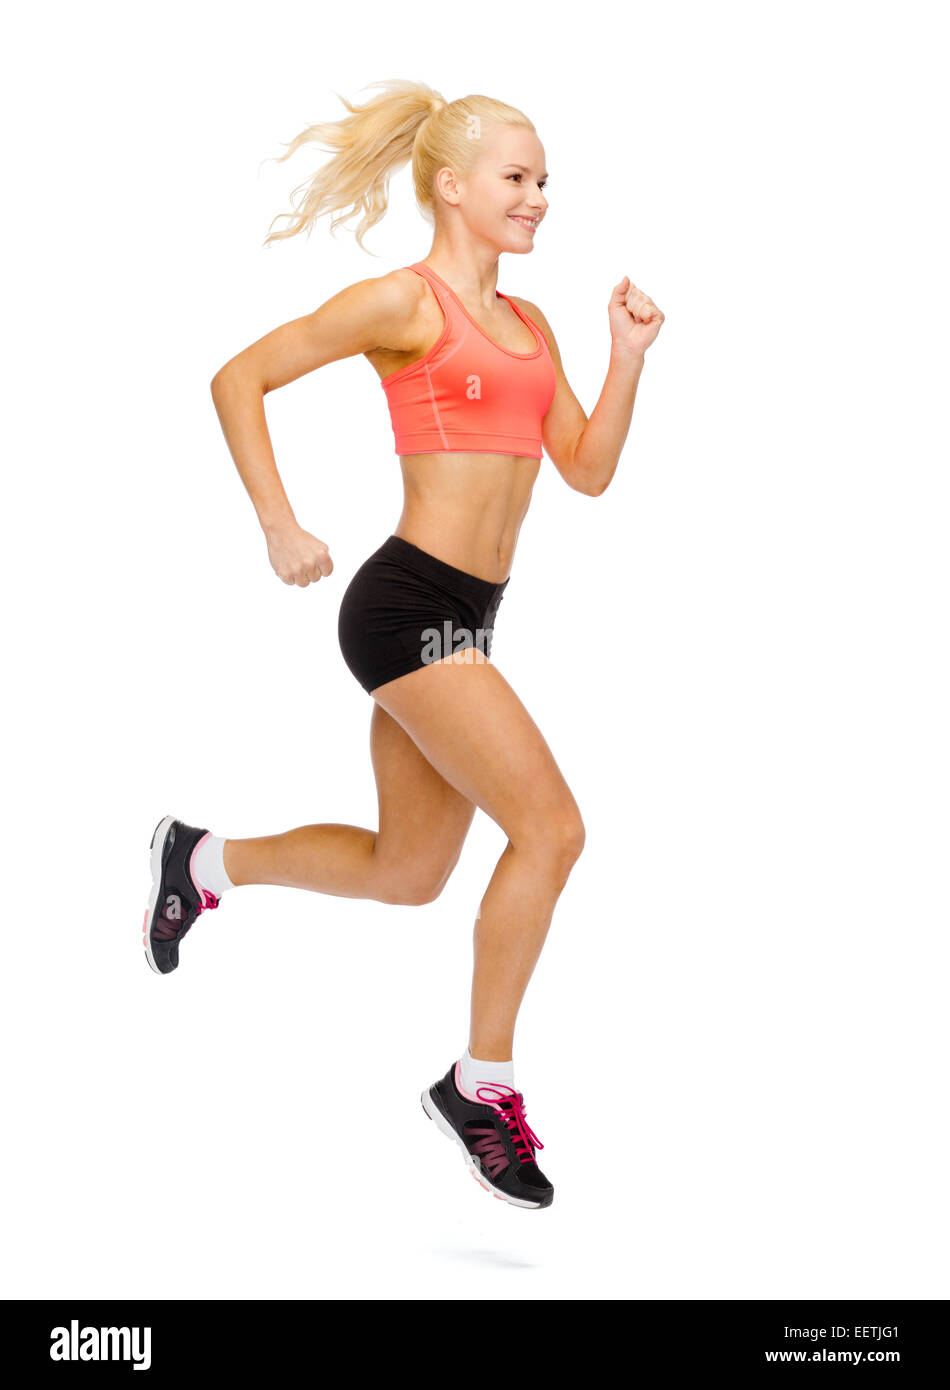 sporty woman running or jumping Stock Photo